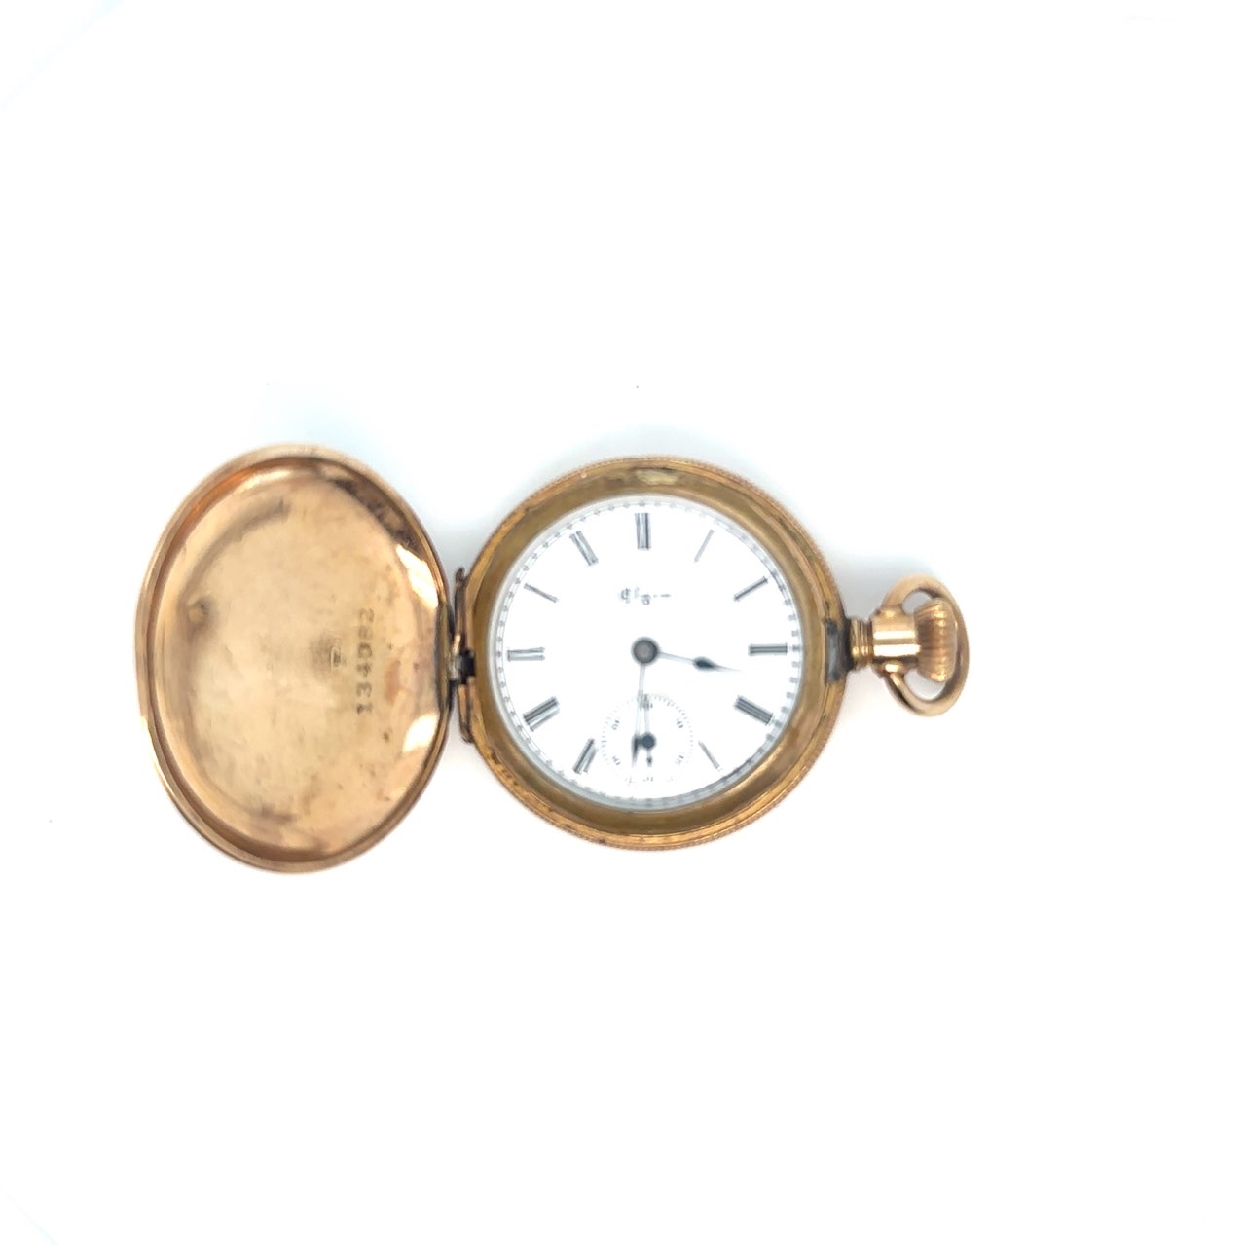 14K Yellow Gold Elgin Pocket Watch 
Serial #: 134082
*Comes with Appraisal 